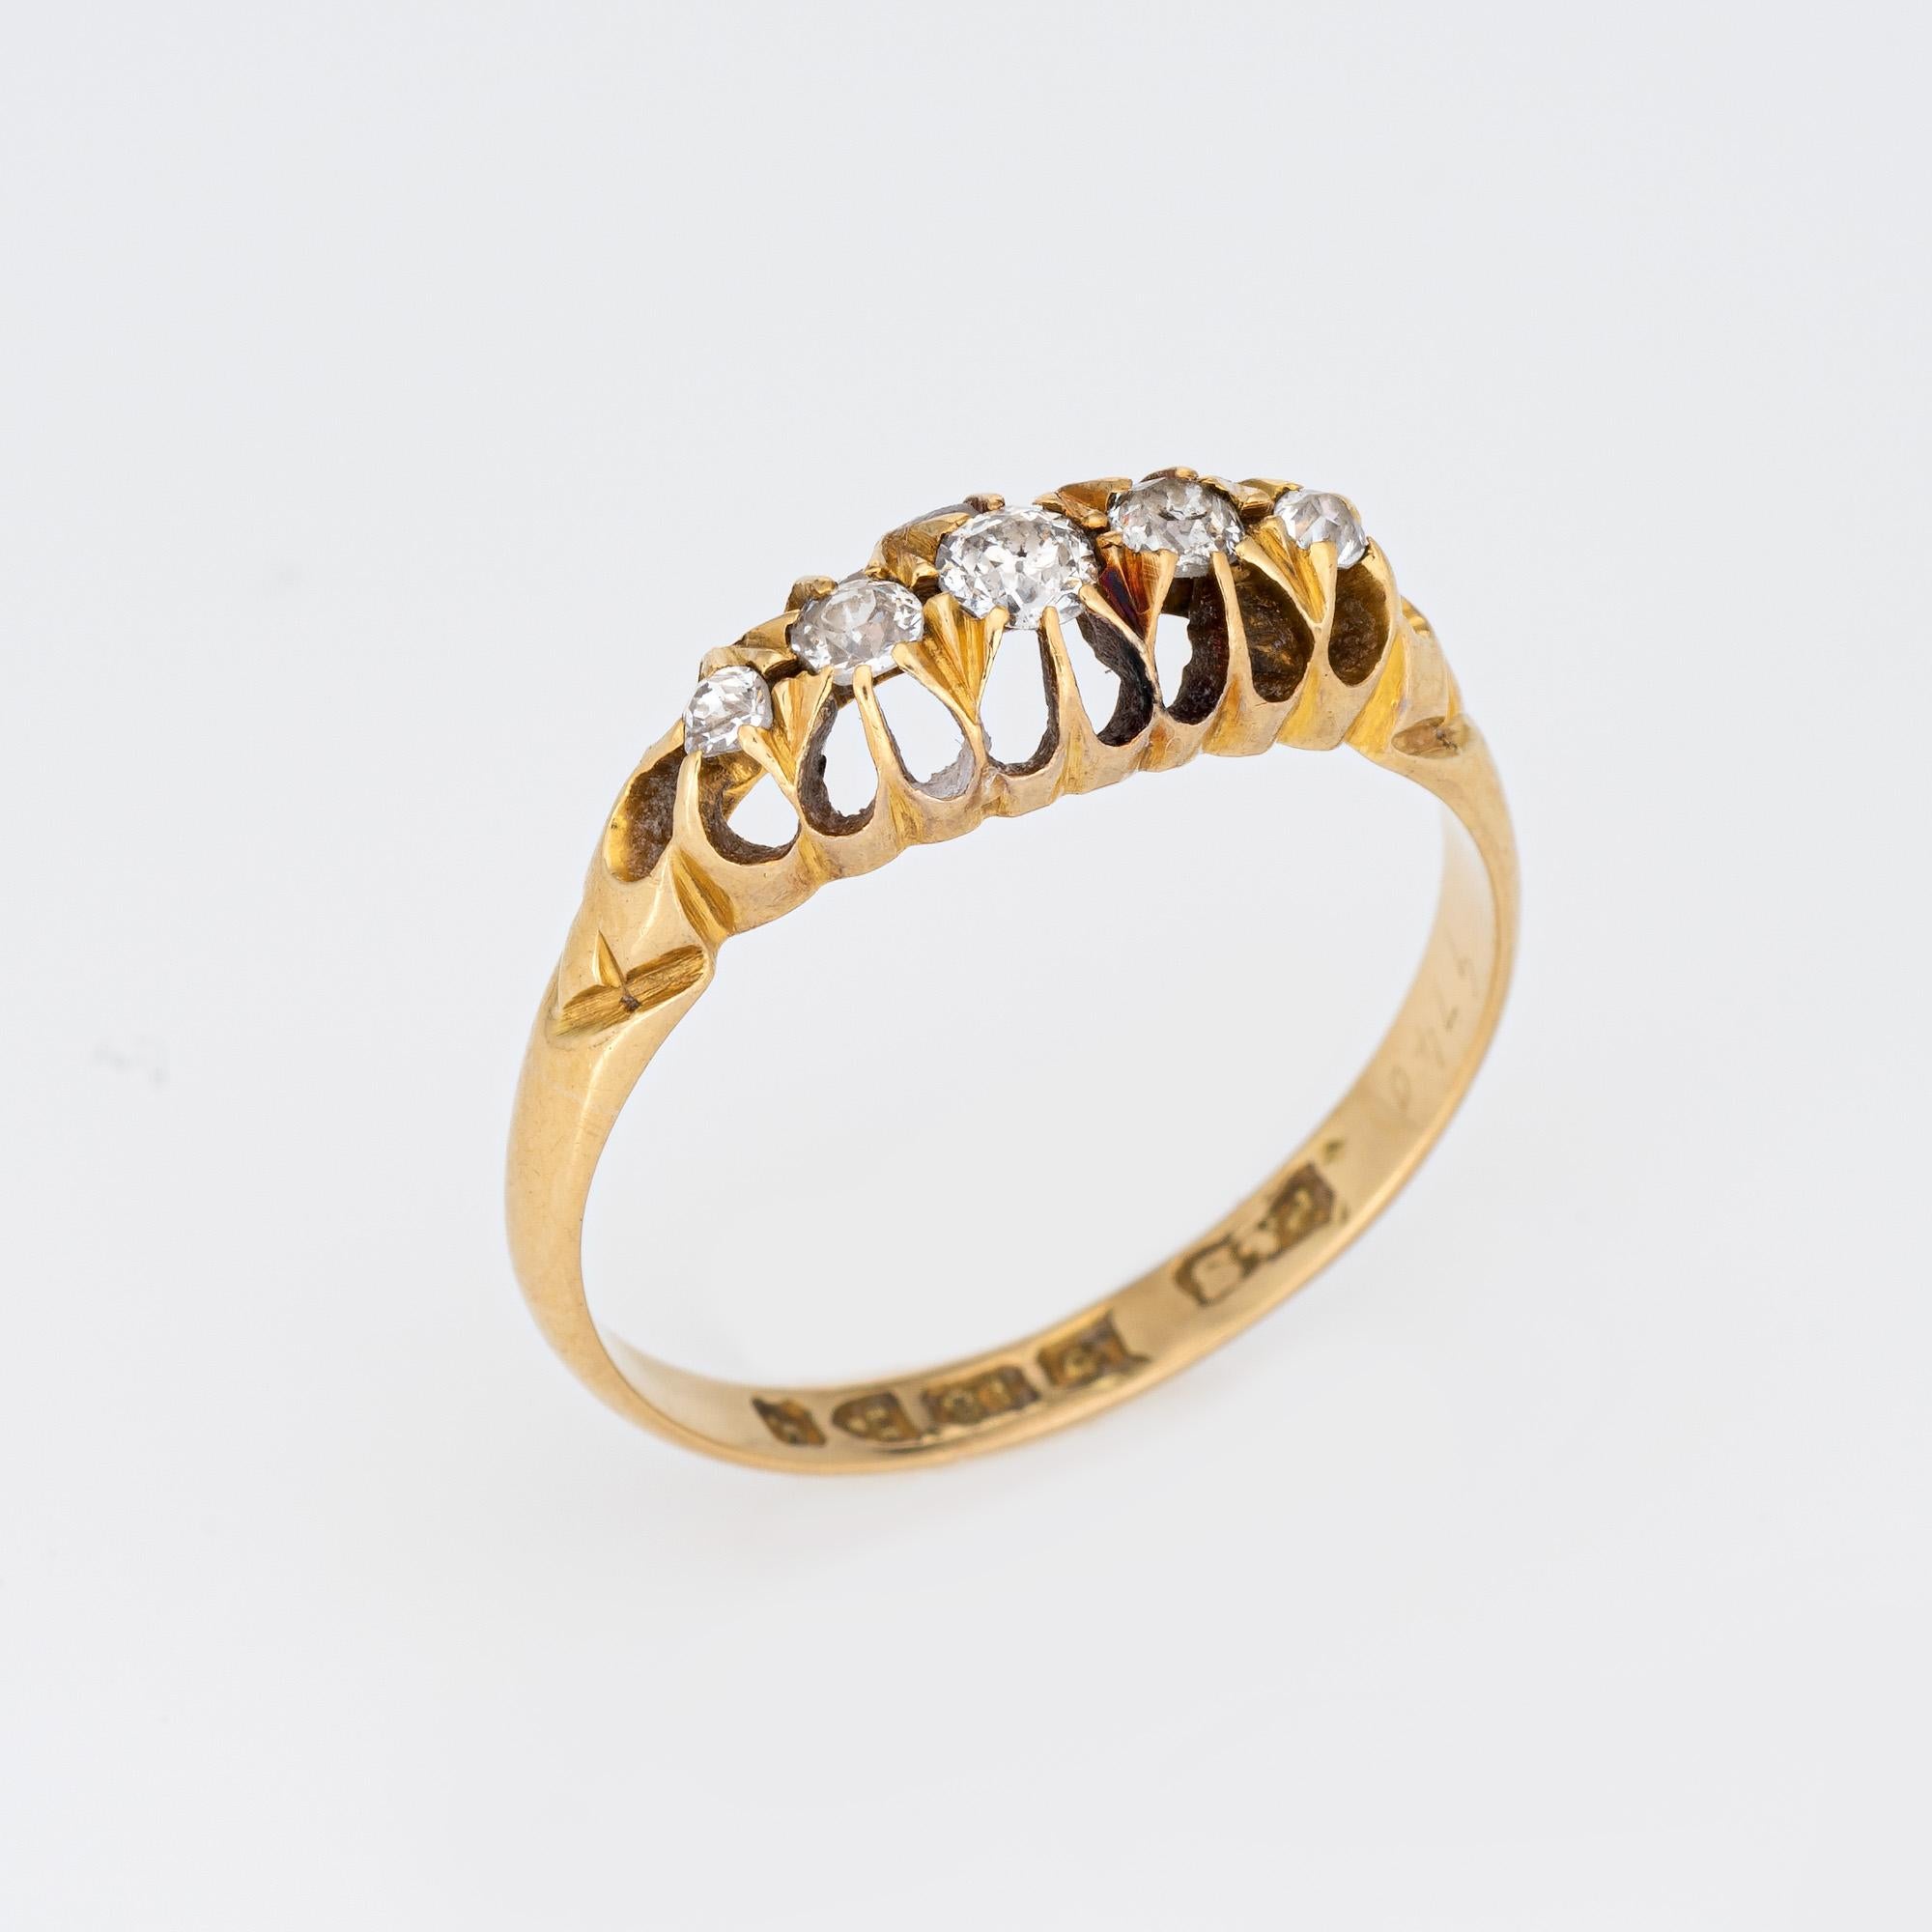 
Antique Edwardian 5 stone diamond ring (circa 1905), crafted in 18 karat yellow gold. 

Five old Mine cut diamonds total an estimated at 0.20 carats (estimated at I-J color and SI2-I1 clarity).

The old Mine cut diamonds are set in a classic 5